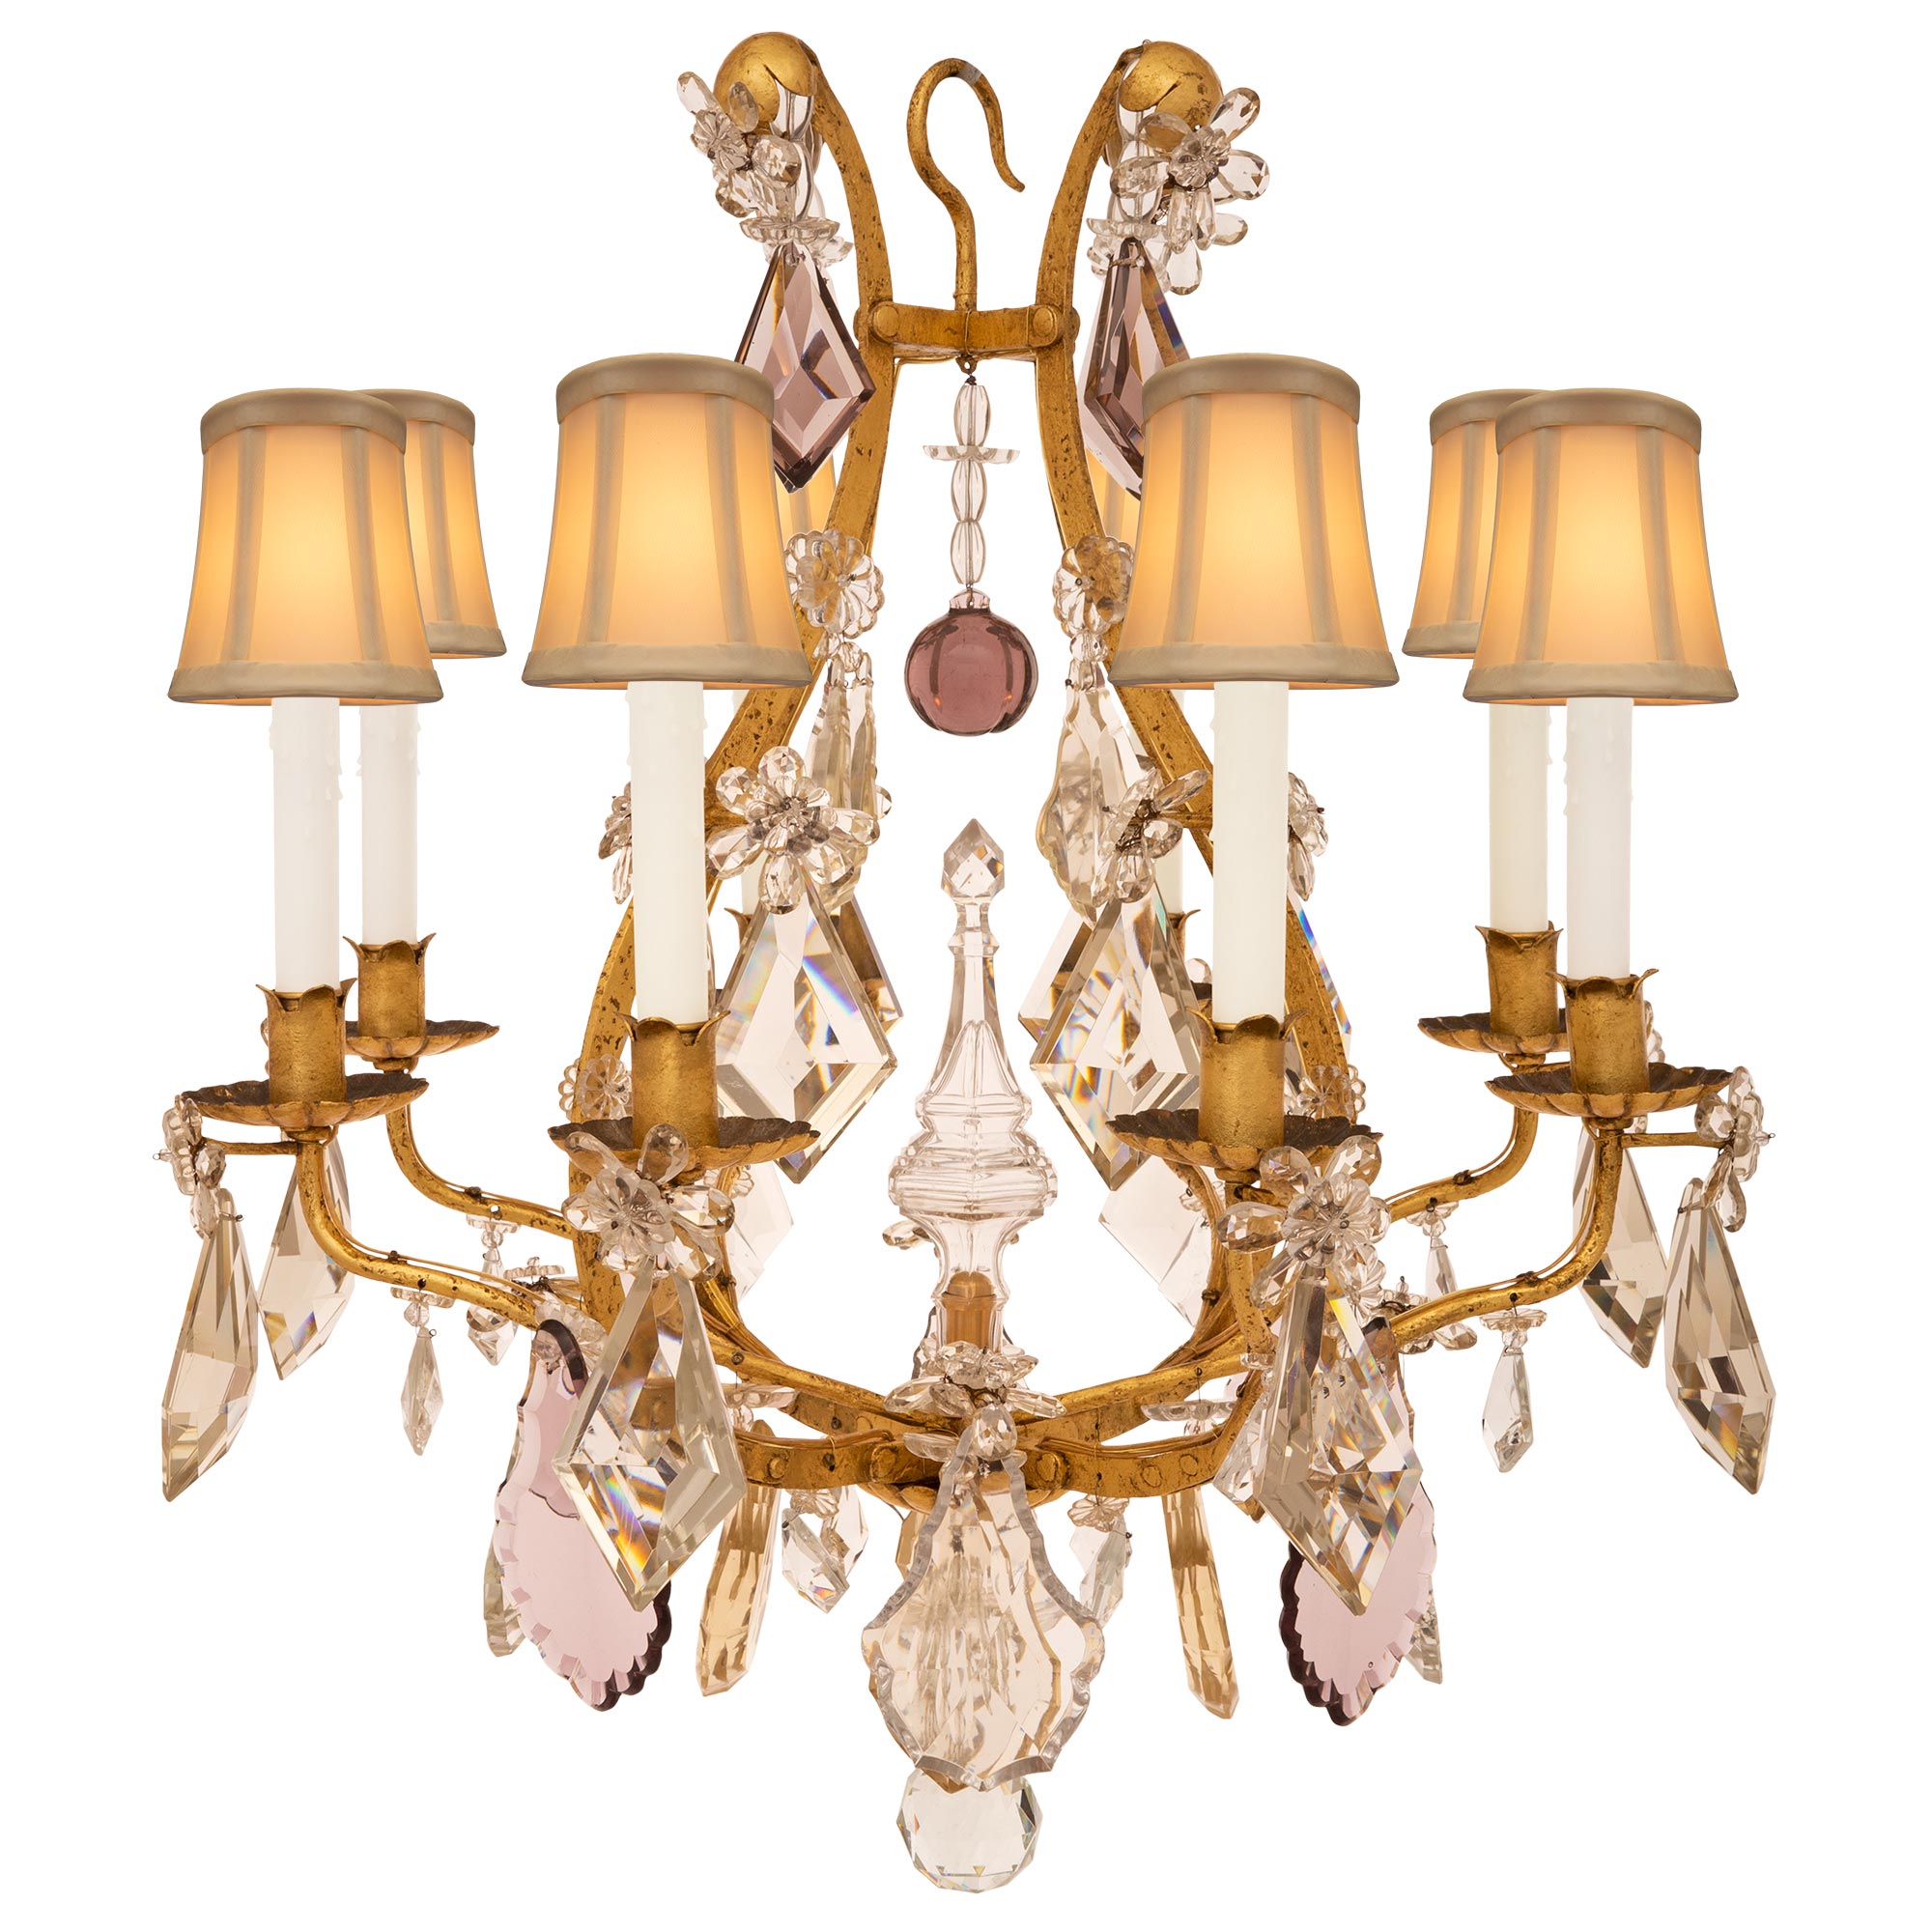 French 19th Century Louis XV St. Gilt Metal and Baccarat Crystal Chandelier For Sale